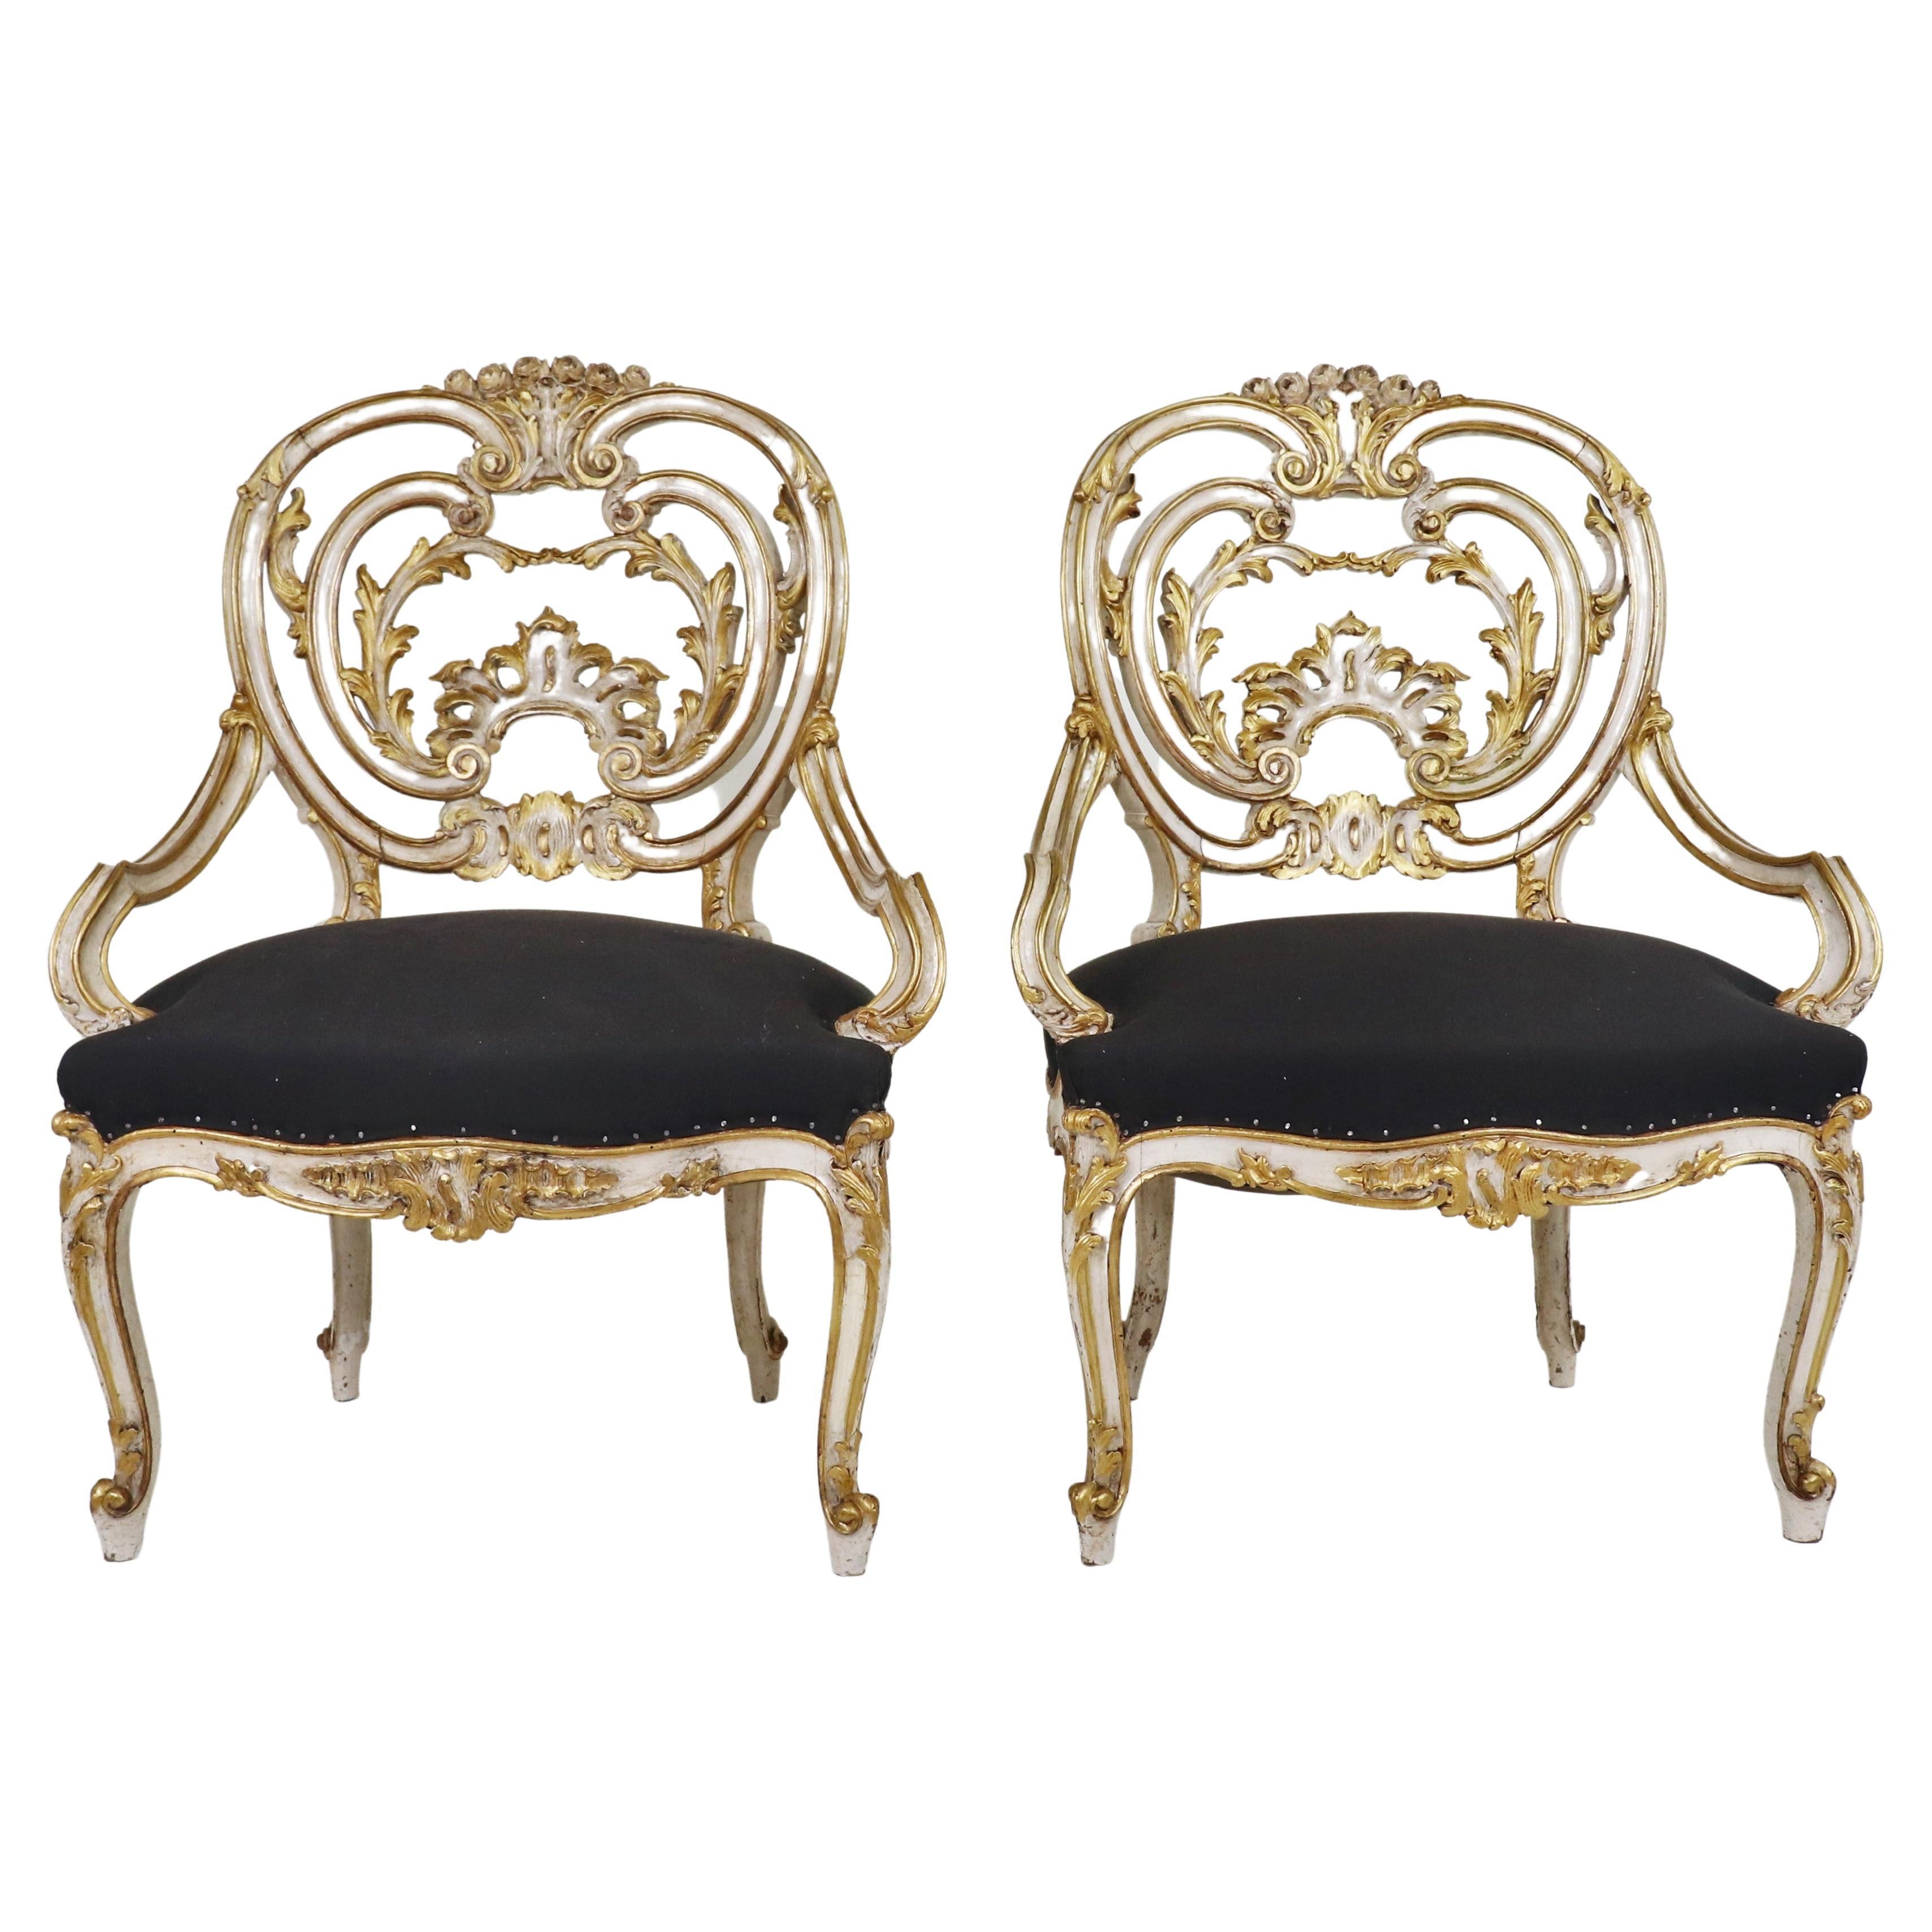 Pair of Early 19th Century Louis XIV Style Fauteuil Armchairs by Maison Jansen For Sale